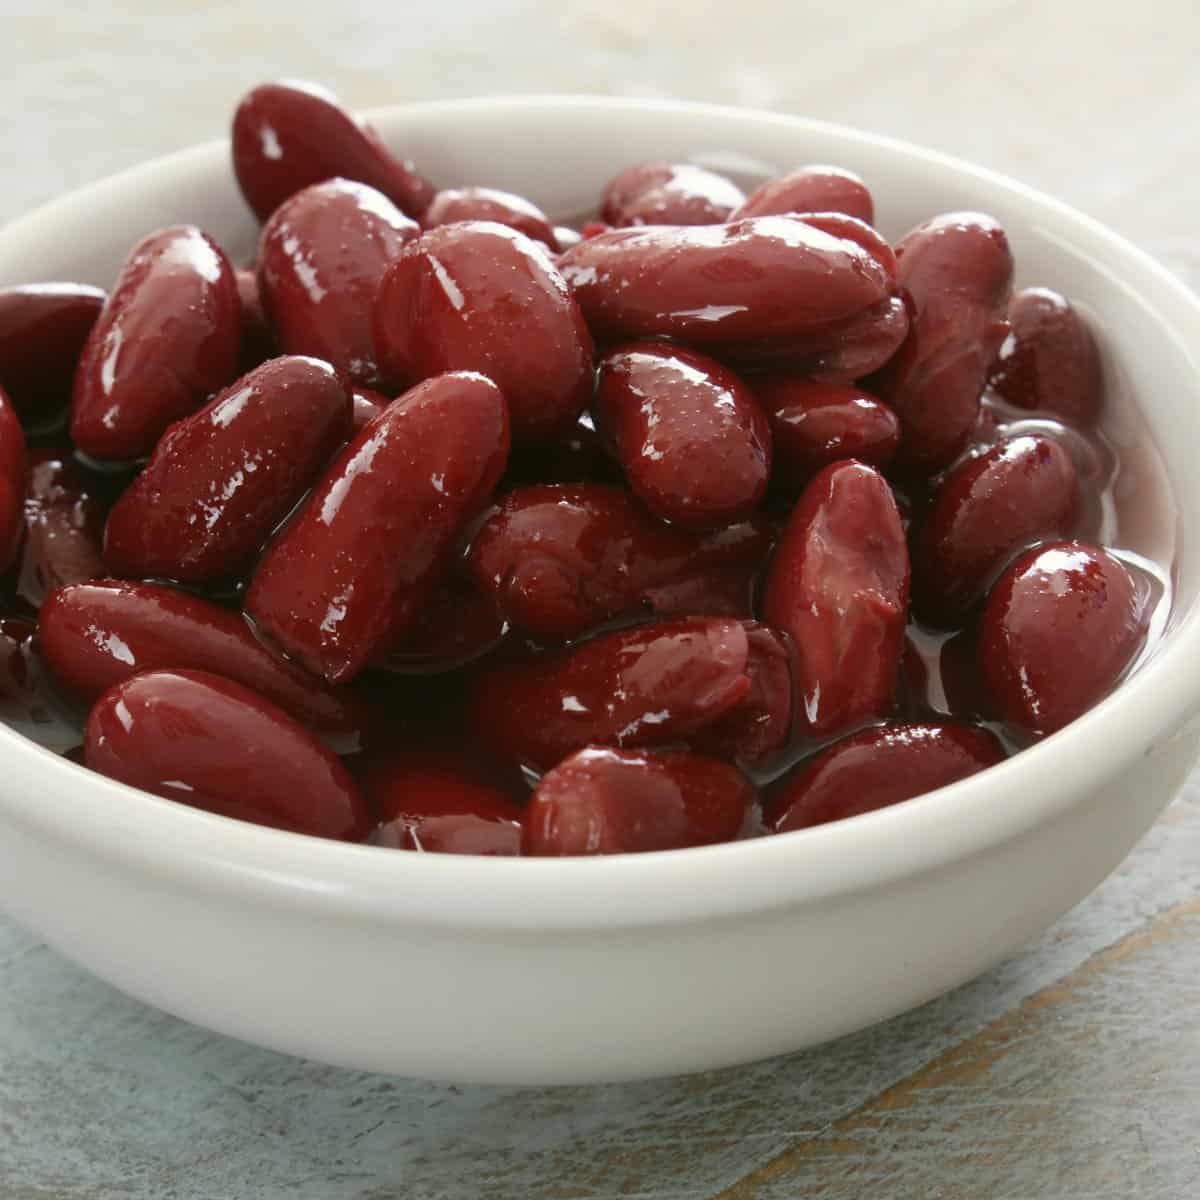 How to cook with kidney beans